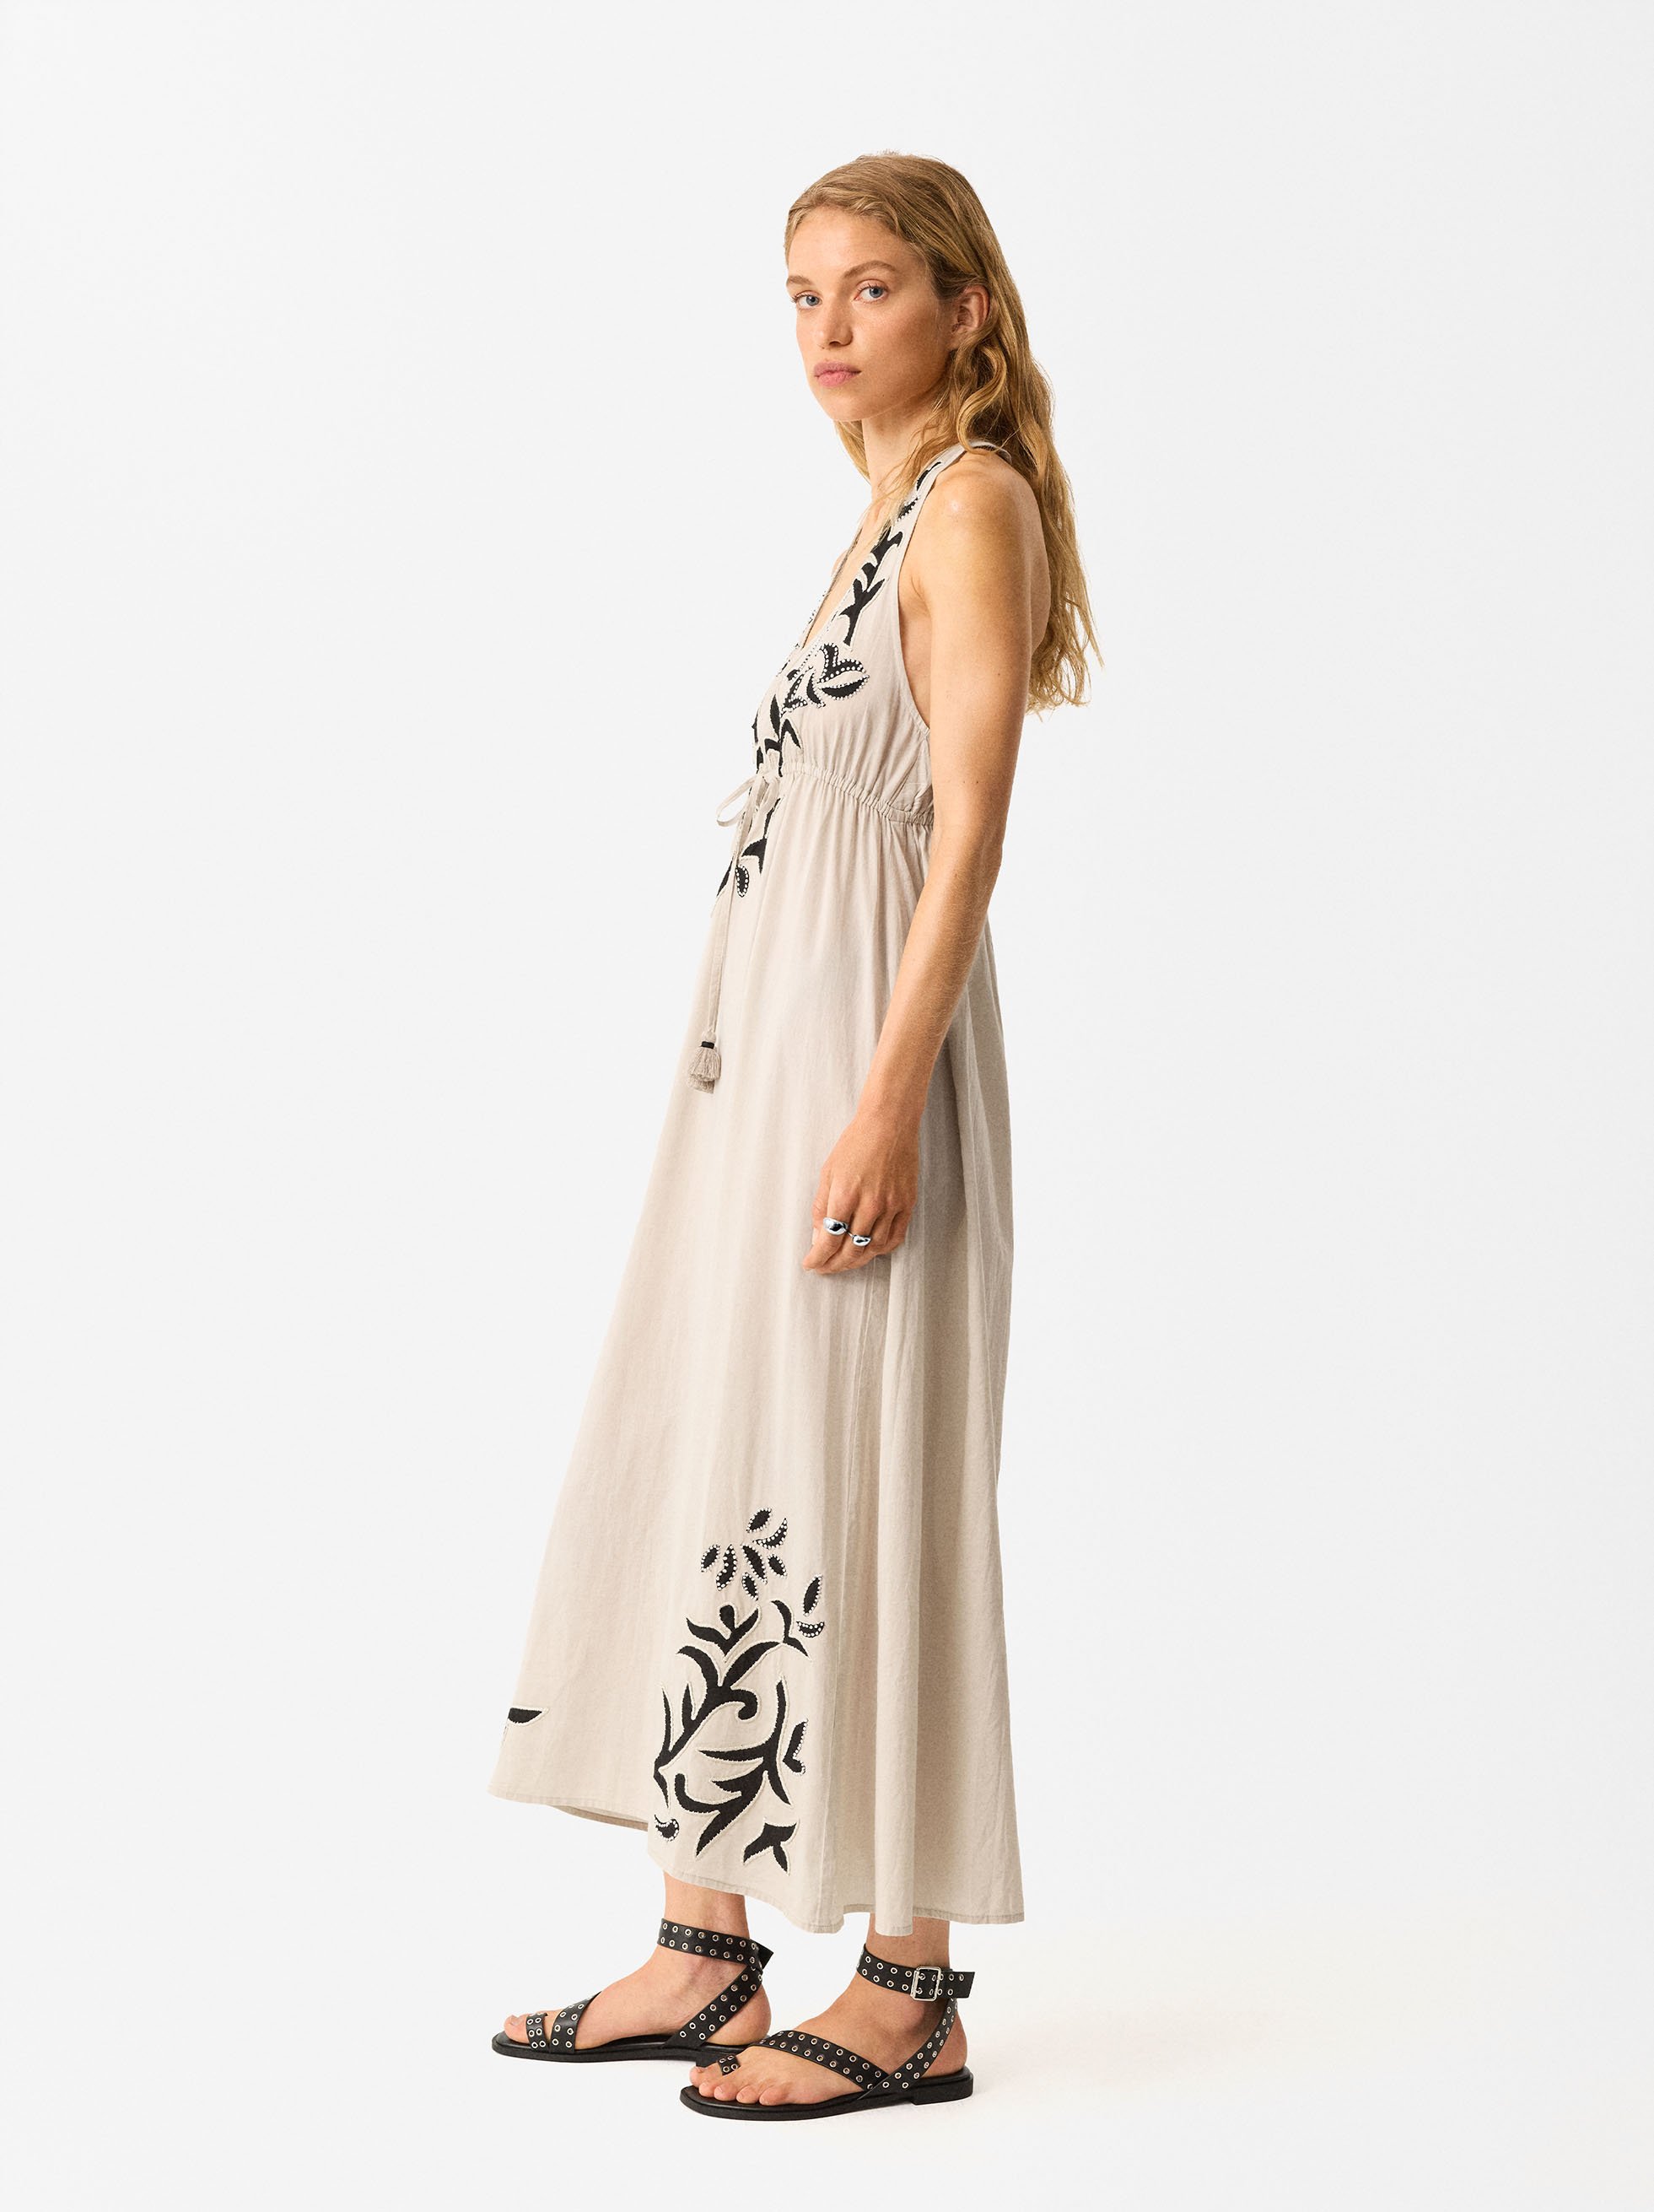 Online Exclusive - Long Embroidered Dress image number 2.0